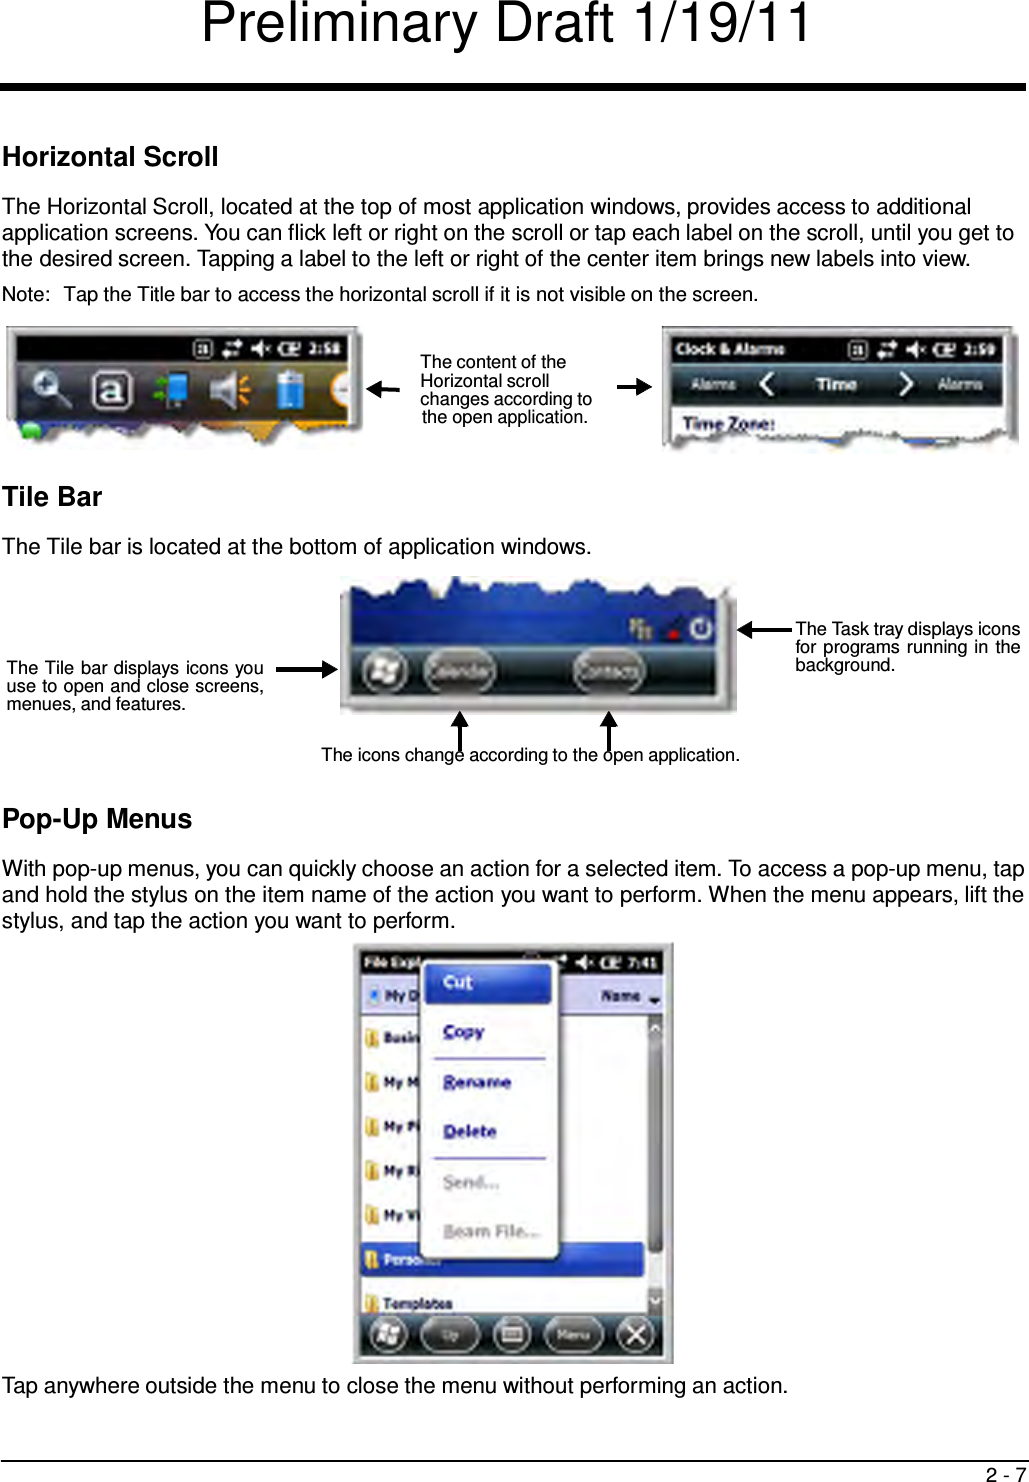 Preliminary Draft 1/19/11 2 - 7      Horizontal Scroll  The Horizontal Scroll, located at the top of most application windows, provides access to additional application screens. You can flick left or right on the scroll or tap each label on the scroll, until you get to the desired screen. Tapping a label to the left or right of the center item brings new labels into view. Note:  Tap the Title bar to access the horizontal scroll if it is not visible on the screen.   The content of the Horizontal scroll changes according to the open application.    Tile Bar  The Tile bar is located at the bottom of application windows.      The Tile bar displays icons you use to open and close screens, menues, and features. The Task tray displays icons for programs running in the background.   The icons change according to the open application.   Pop-Up Menus  With pop-up menus, you can quickly choose an action for a selected item. To access a pop-up menu, tap and hold the stylus on the item name of the action you want to perform. When the menu appears, lift the stylus, and tap the action you want to perform.                       Tap anywhere outside the menu to close the menu without performing an action. 